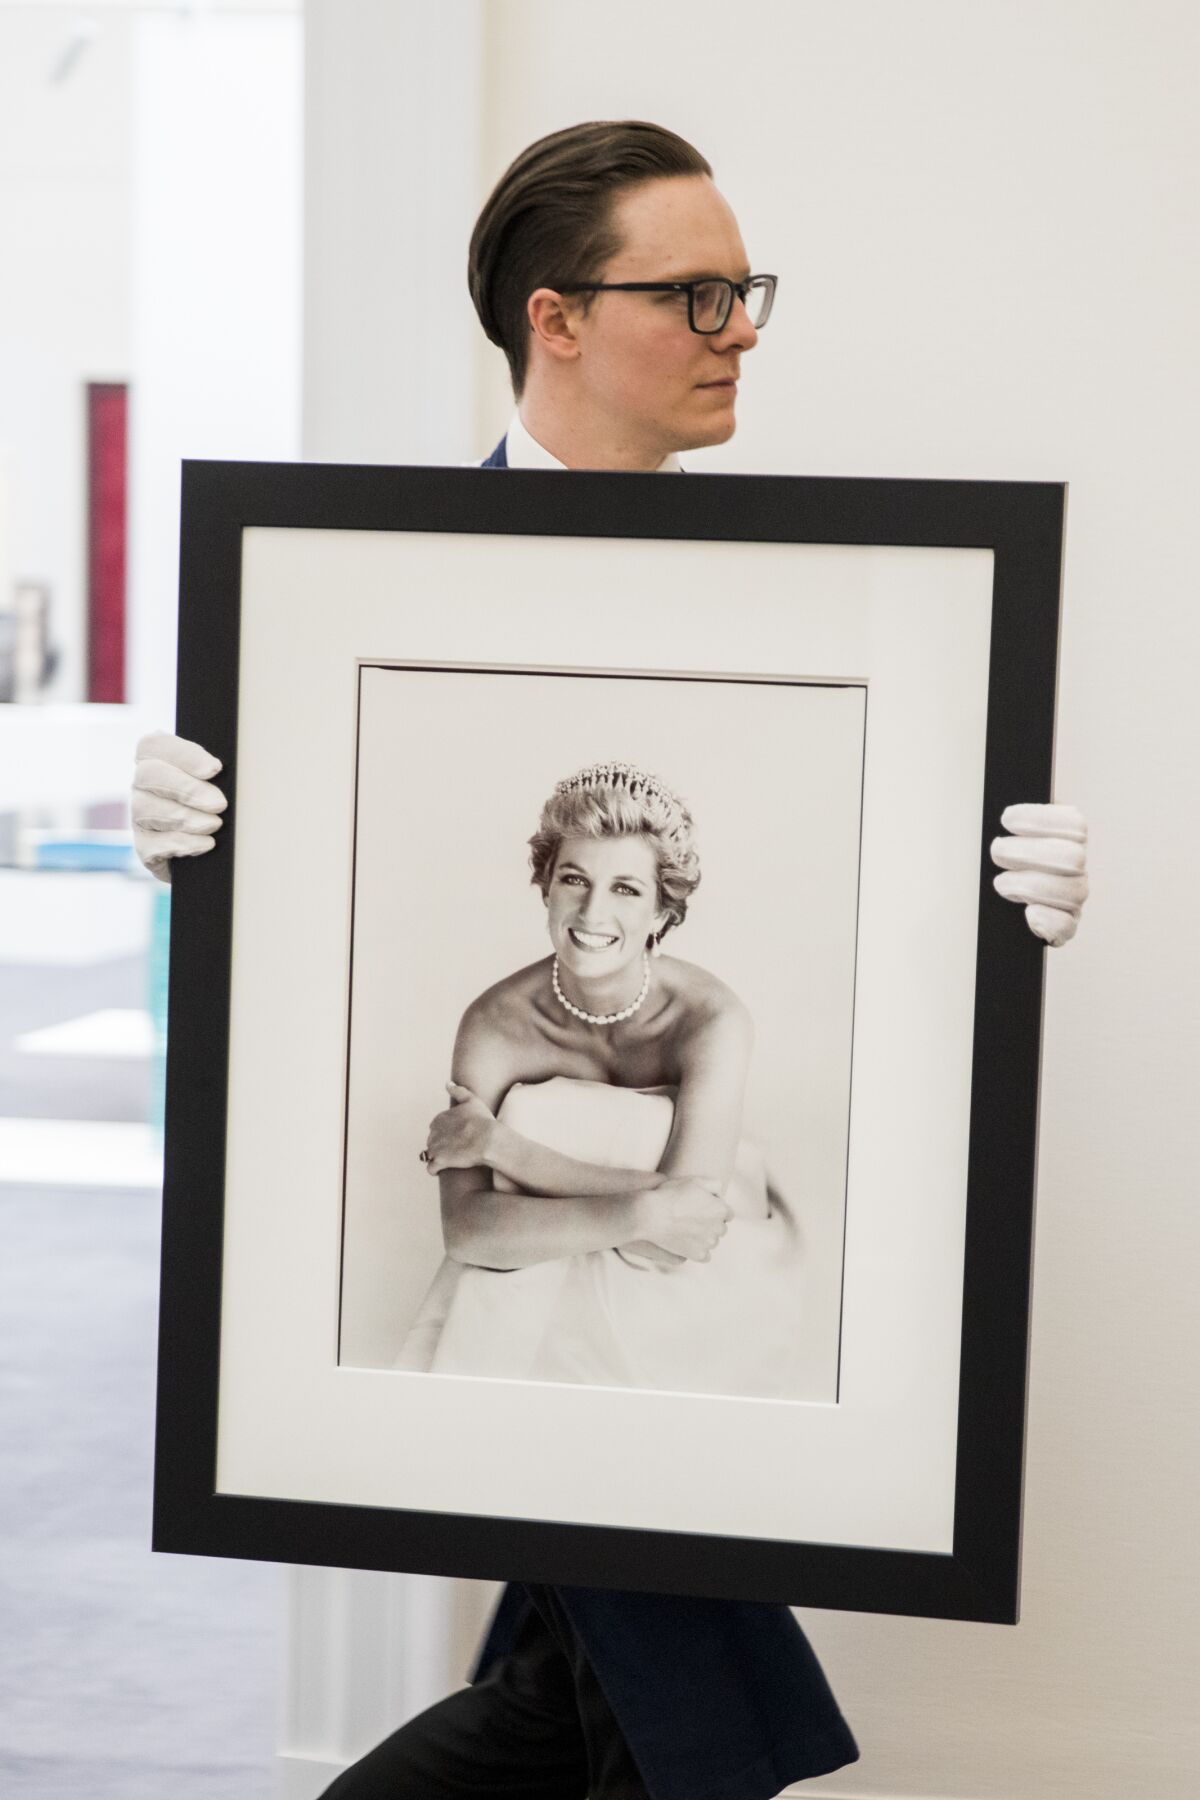 Patrick Demarchelier's Princess Diana photo is carried by a man wearing white gloves.